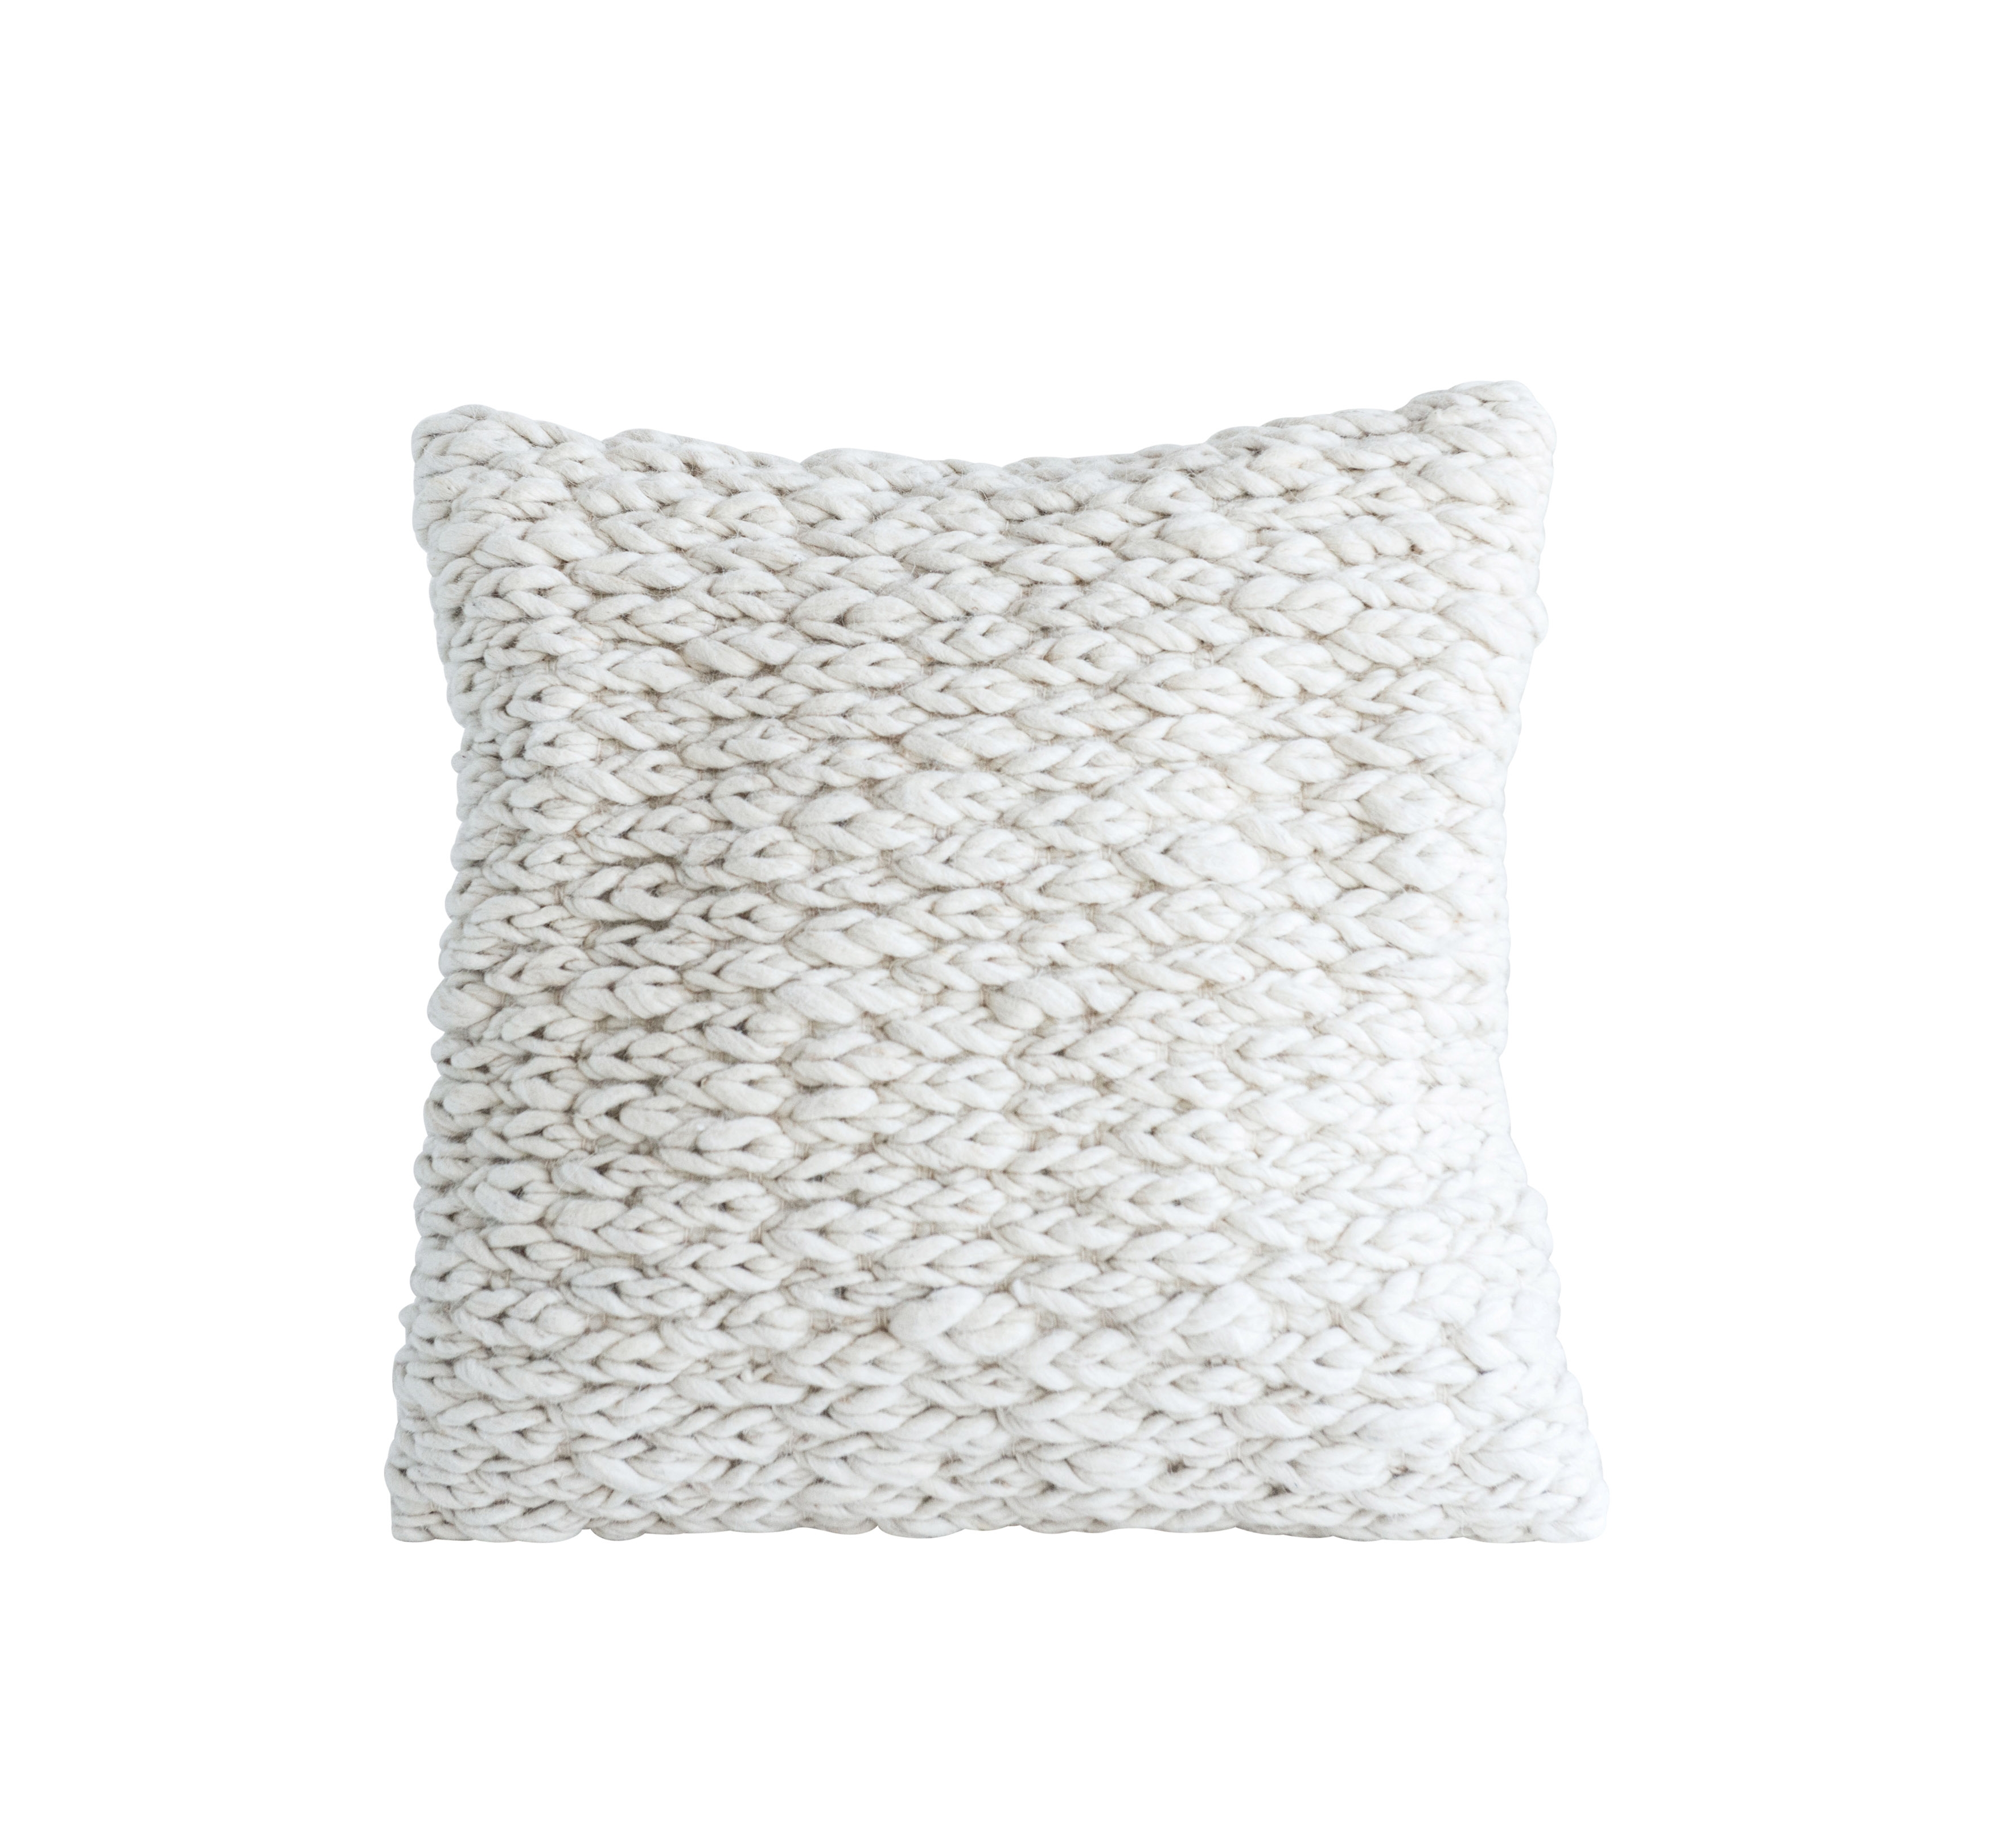 Square Off-White Wool Pillow with Thick Cable Knit Design - Image 0